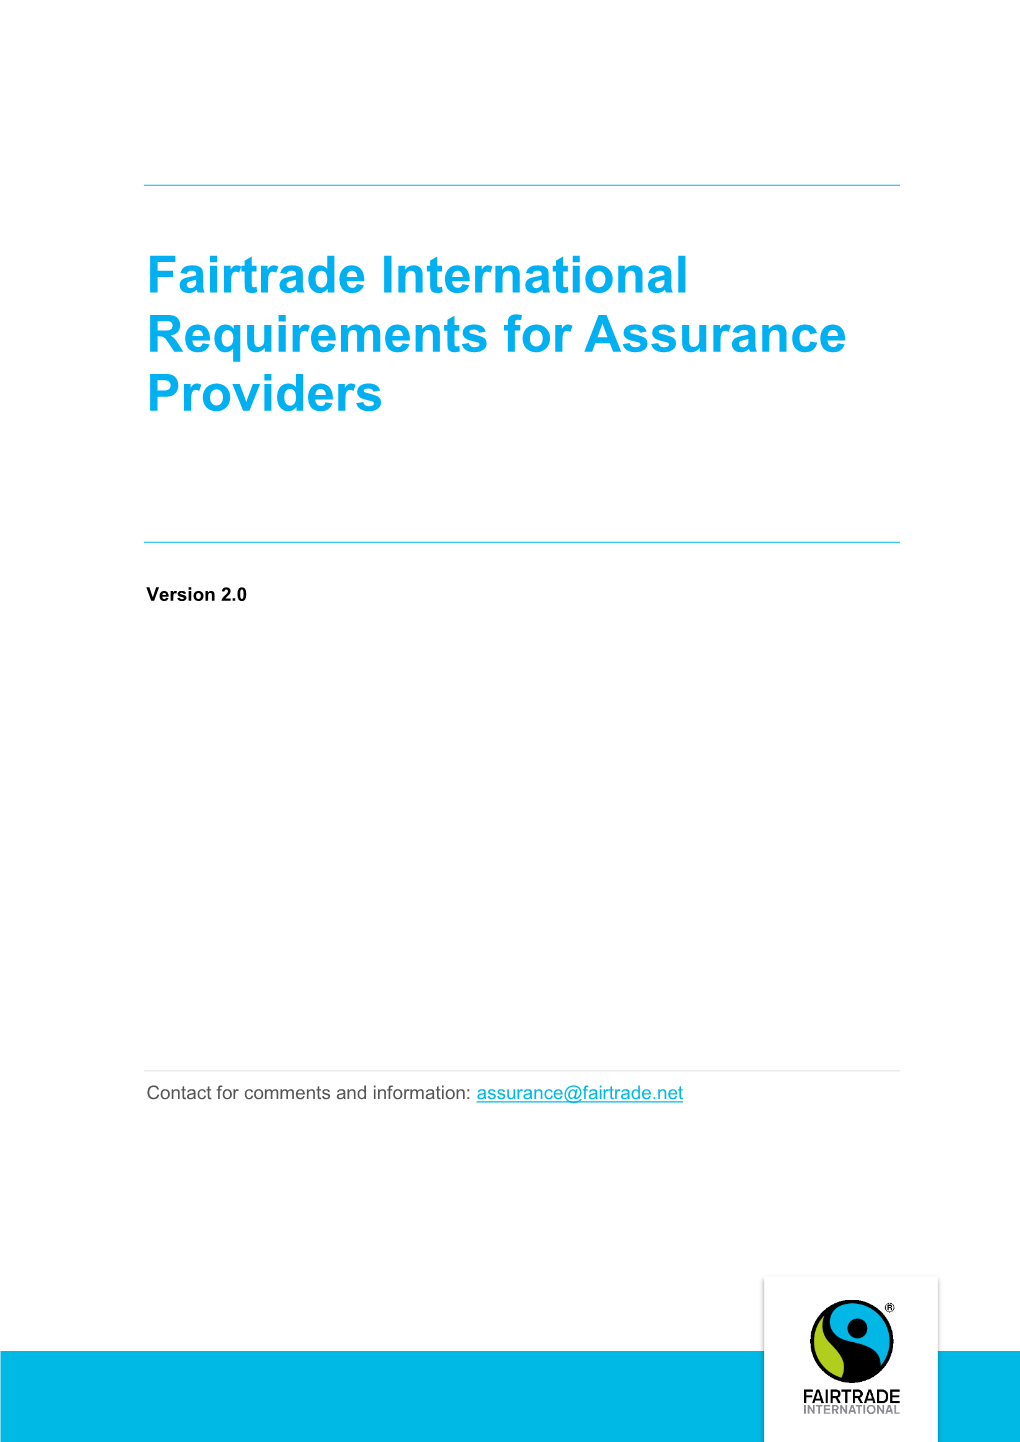 Fairtrade's Requirements for Assurance Providers